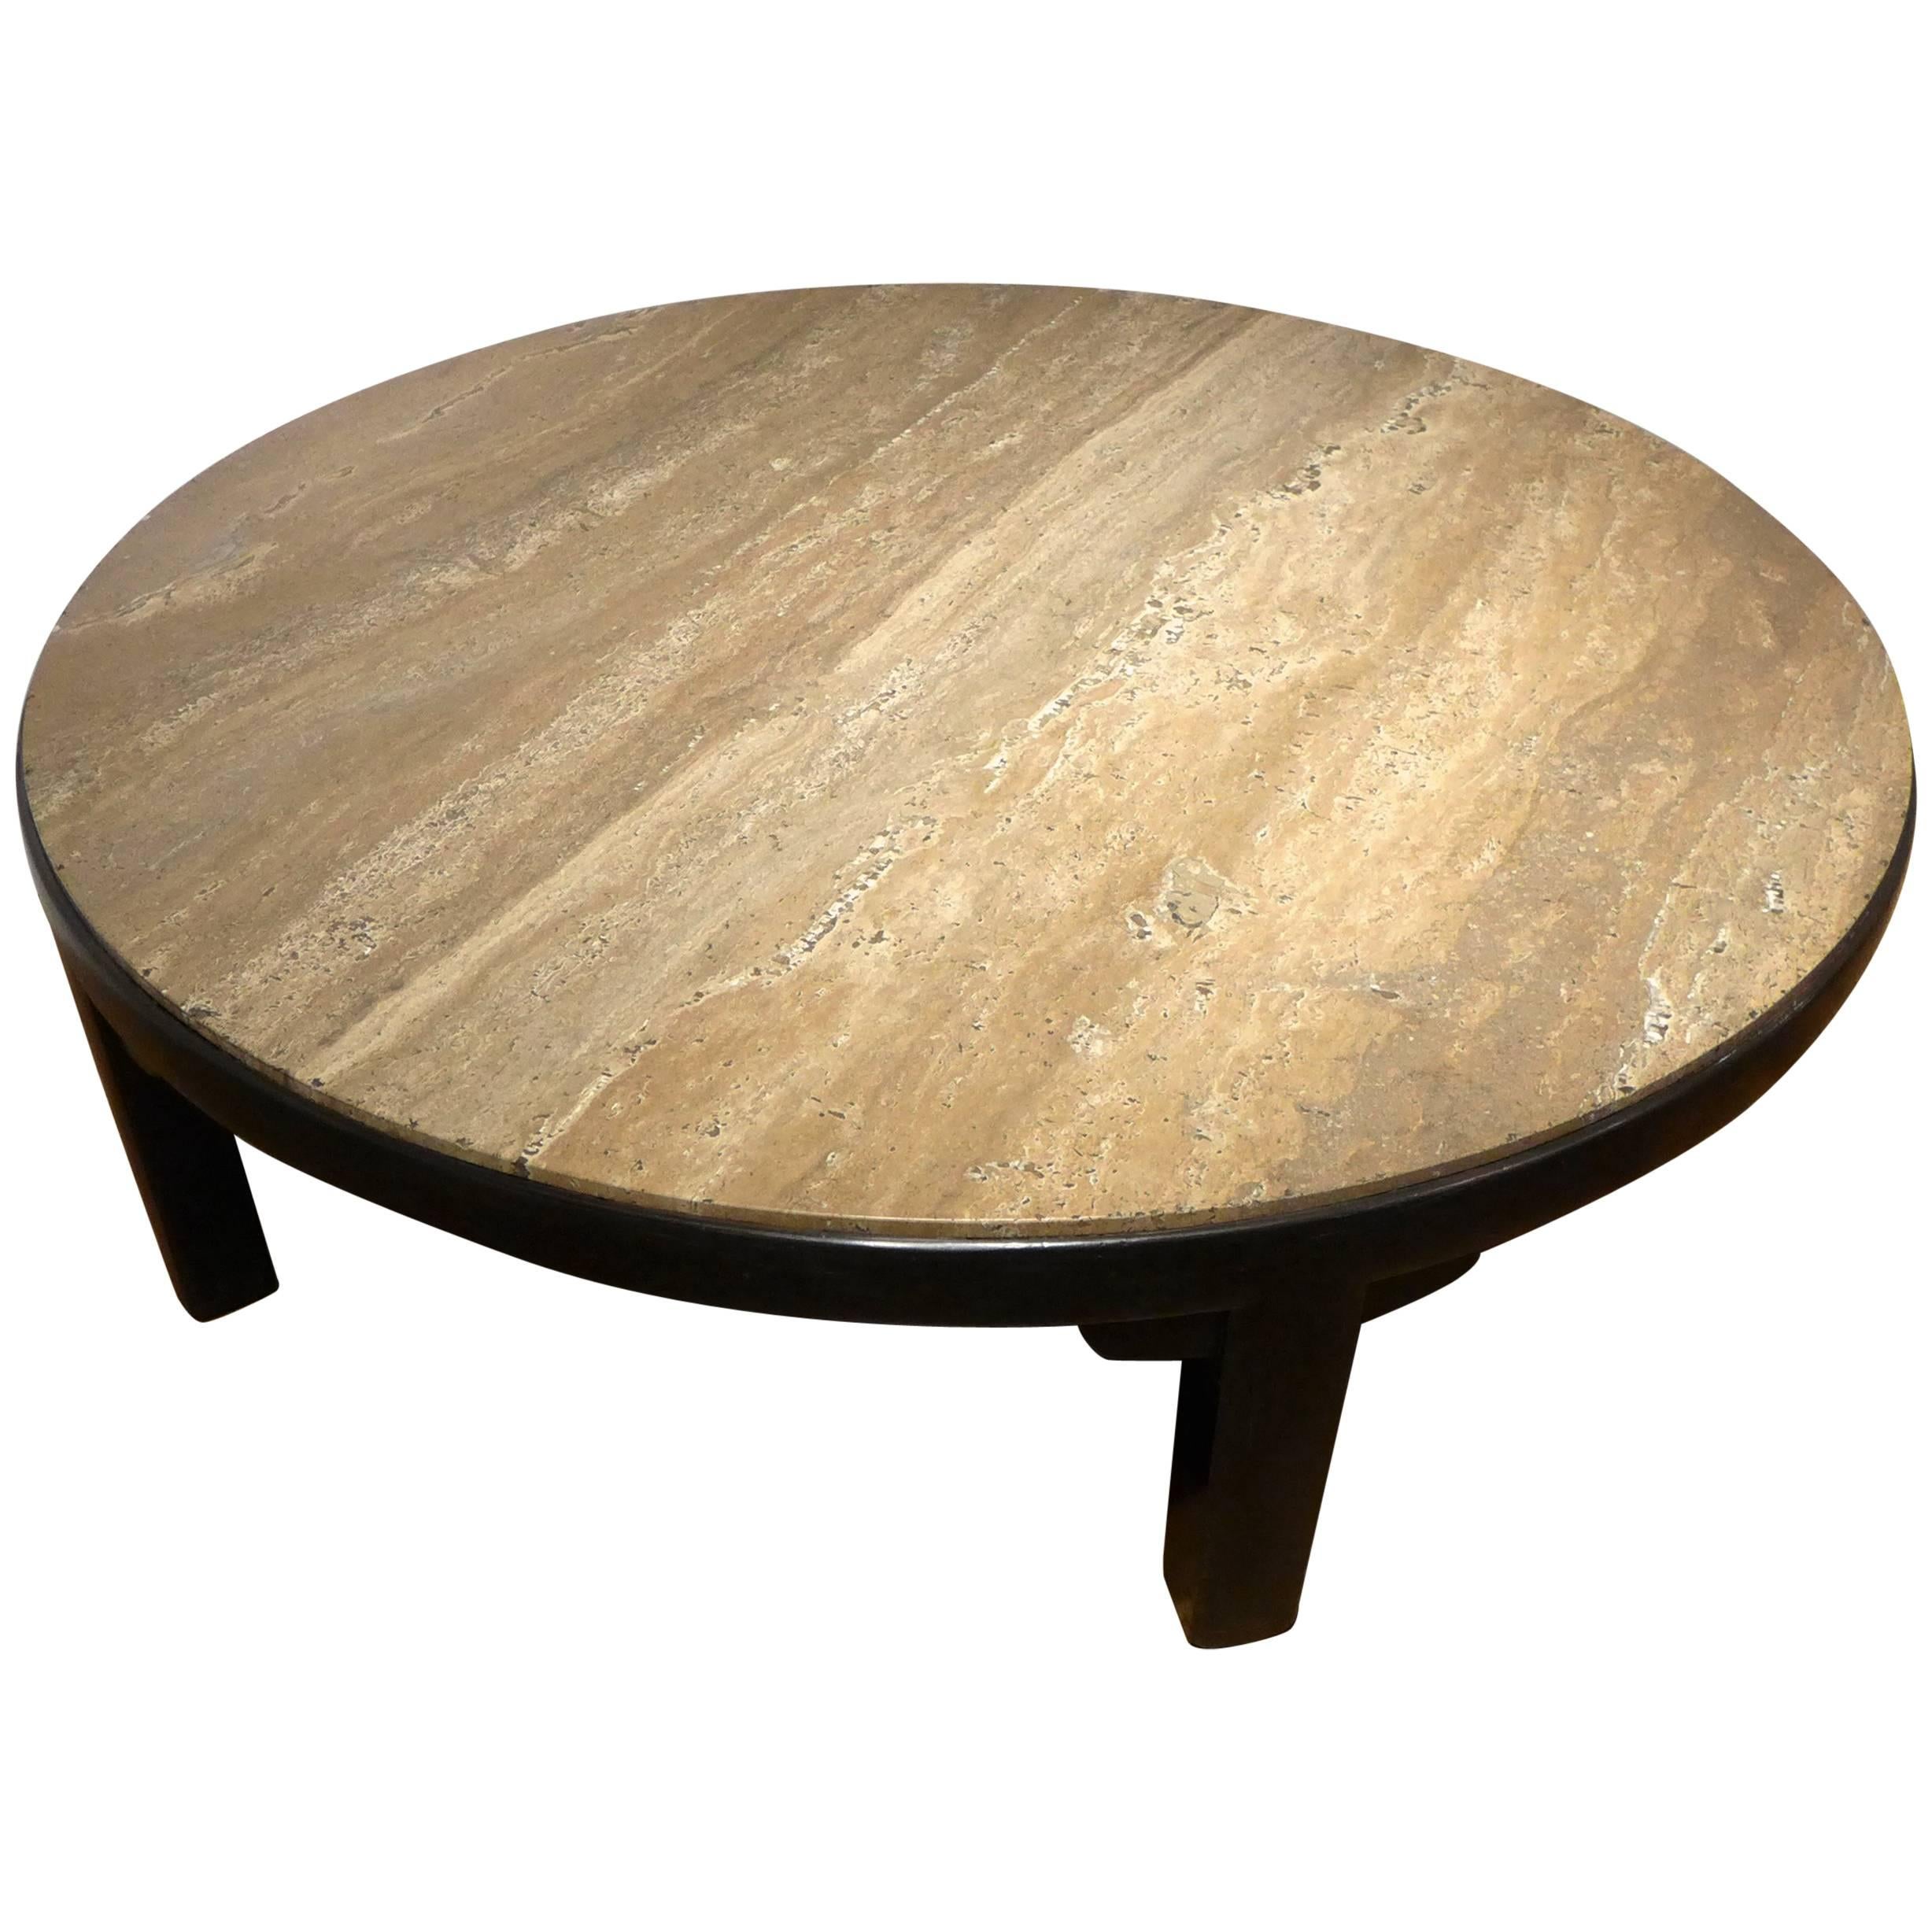 Edward Wormley Cocktail Table with Travertine Top